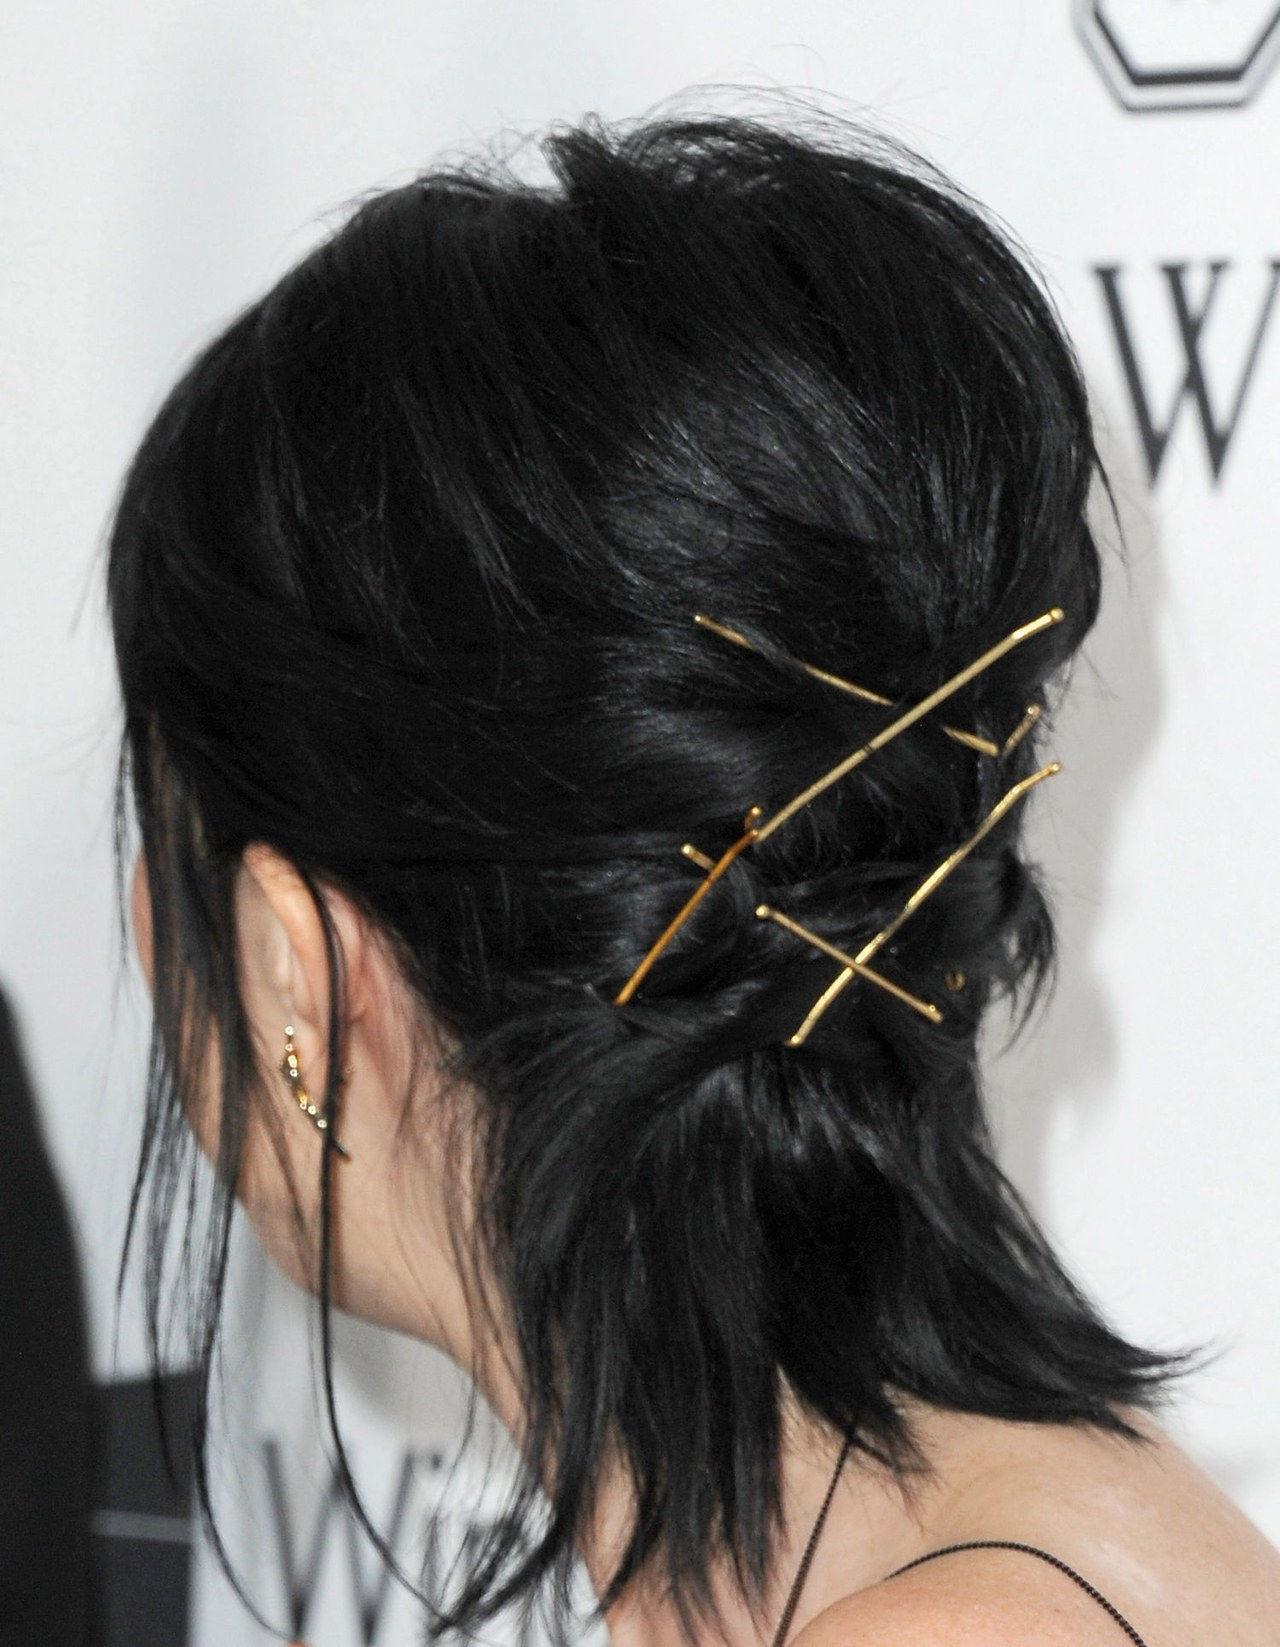 Carly rae jepsen pinned up hairstyle back